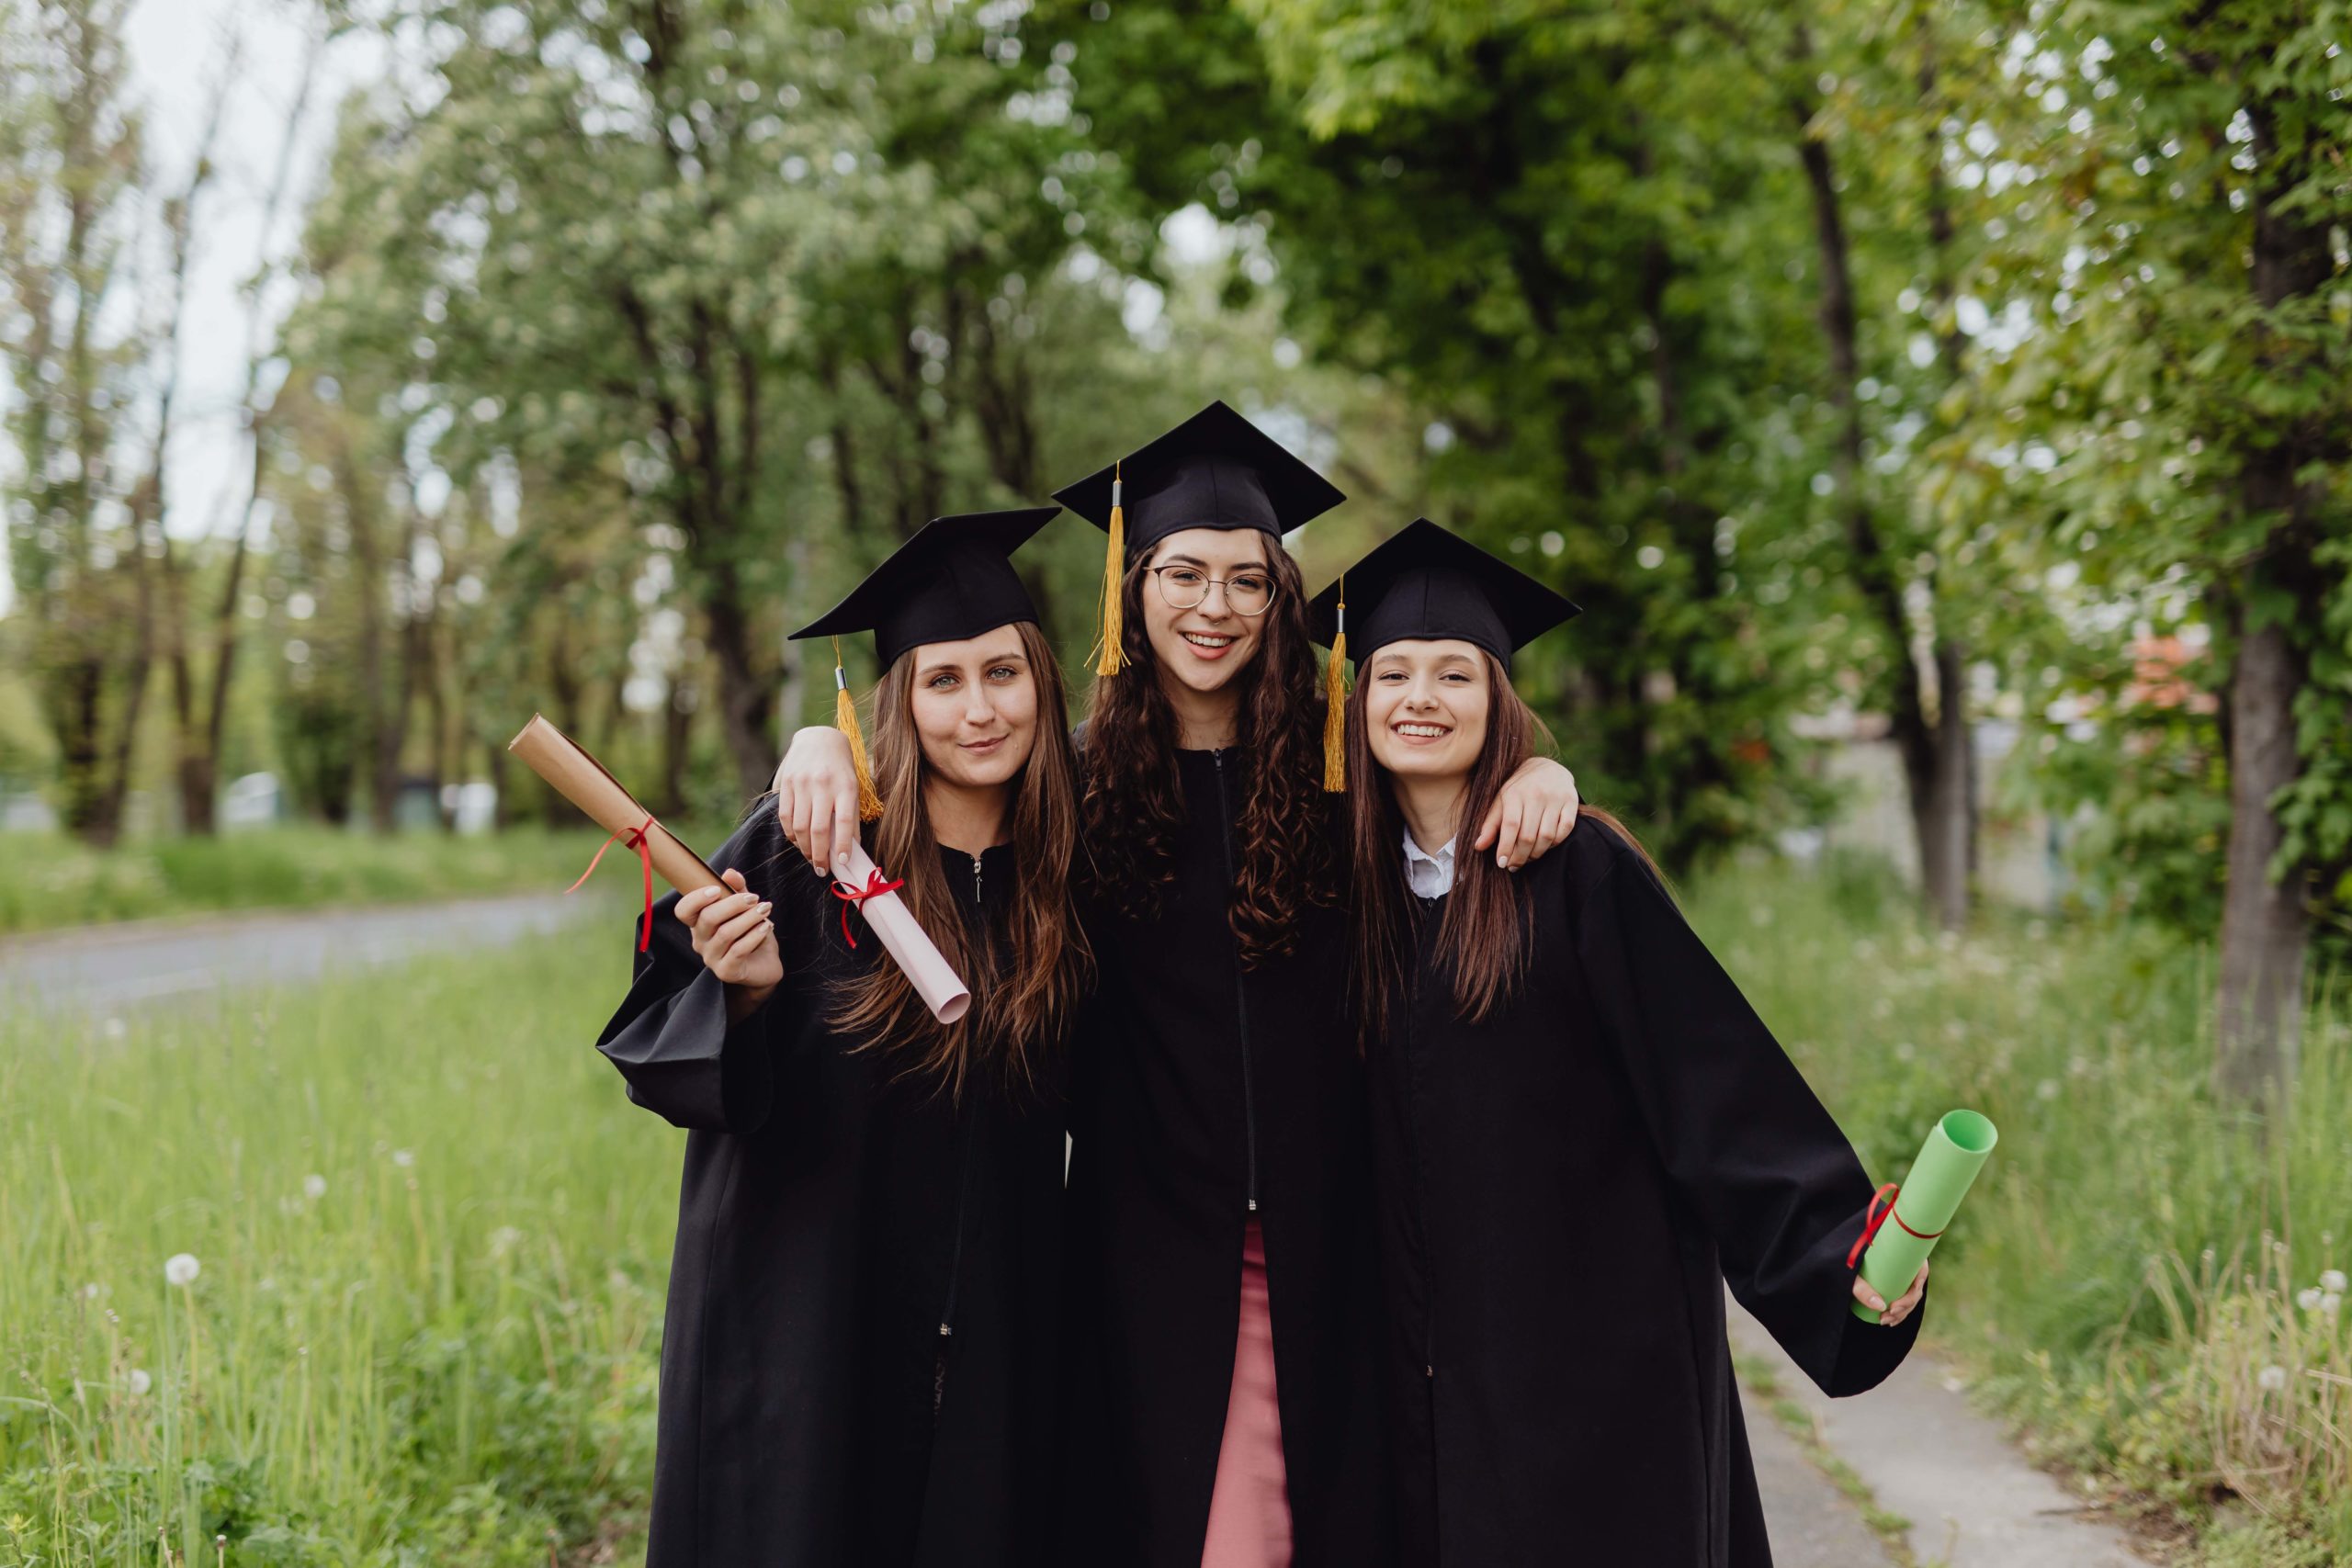 Three women in black graduation caps and gowns pose together with their diplomas